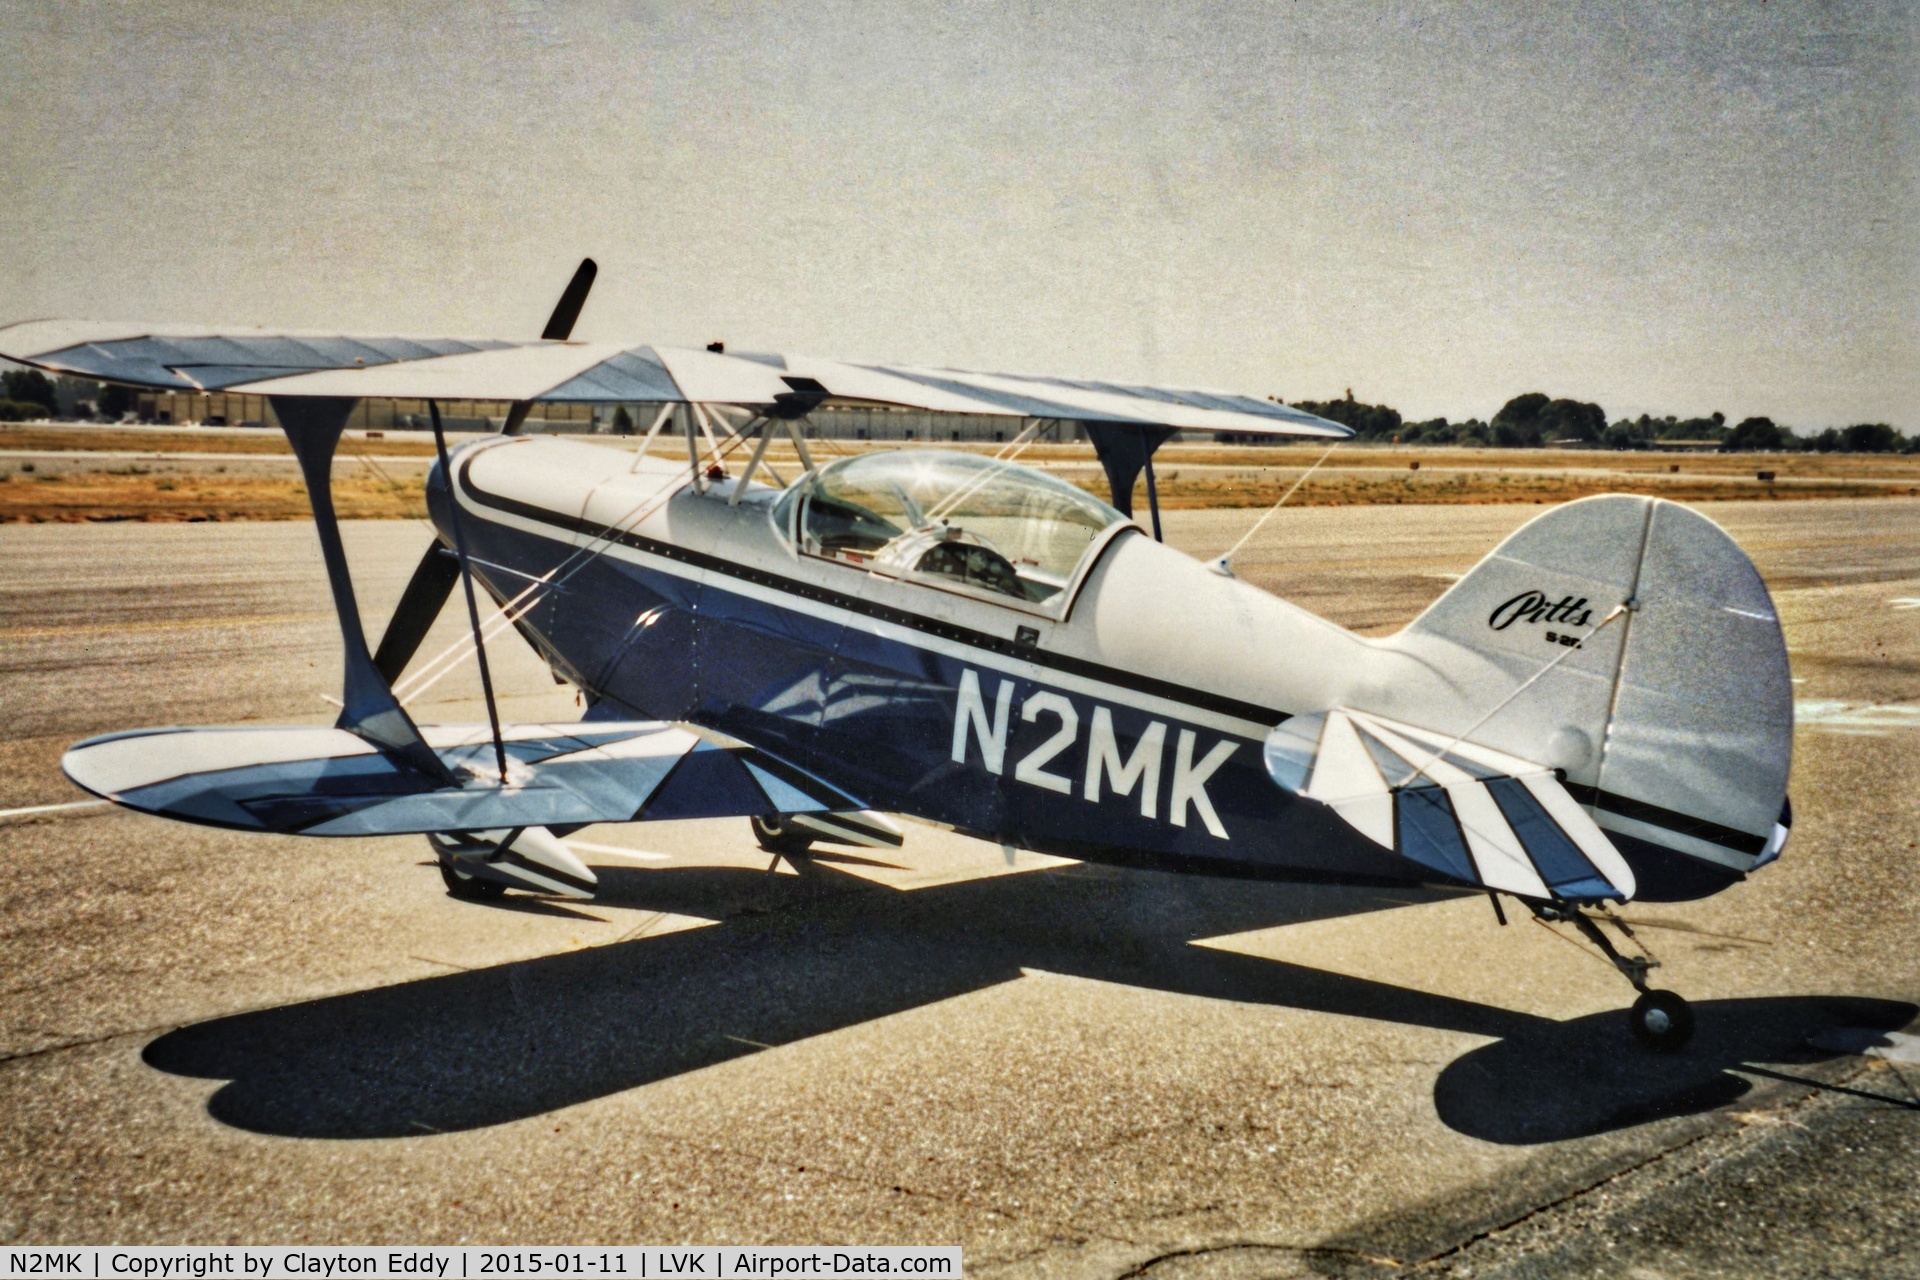 N2MK, 1991 Christen Pitts S-2B Special C/N 5205, N2MK at Livermore Airport in California.